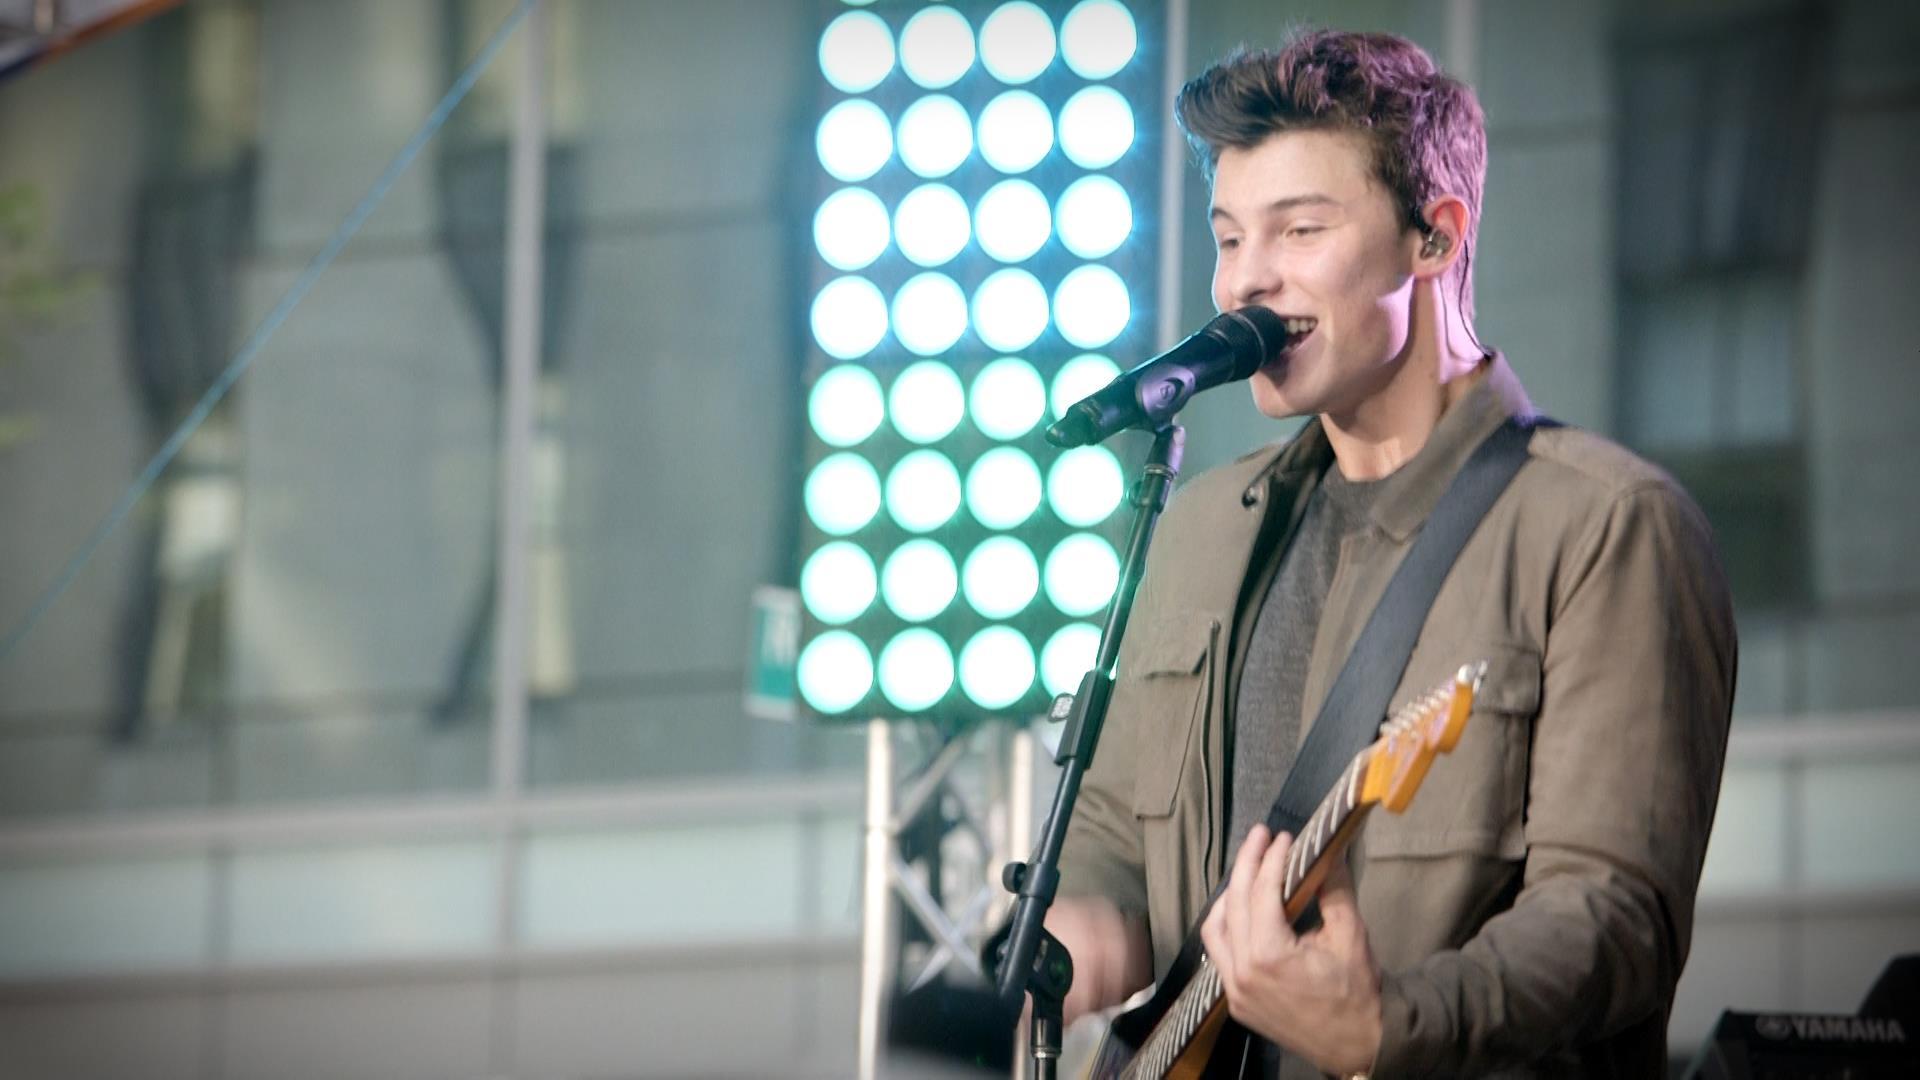 Shawn Mendes plays 'Would You Rather?'